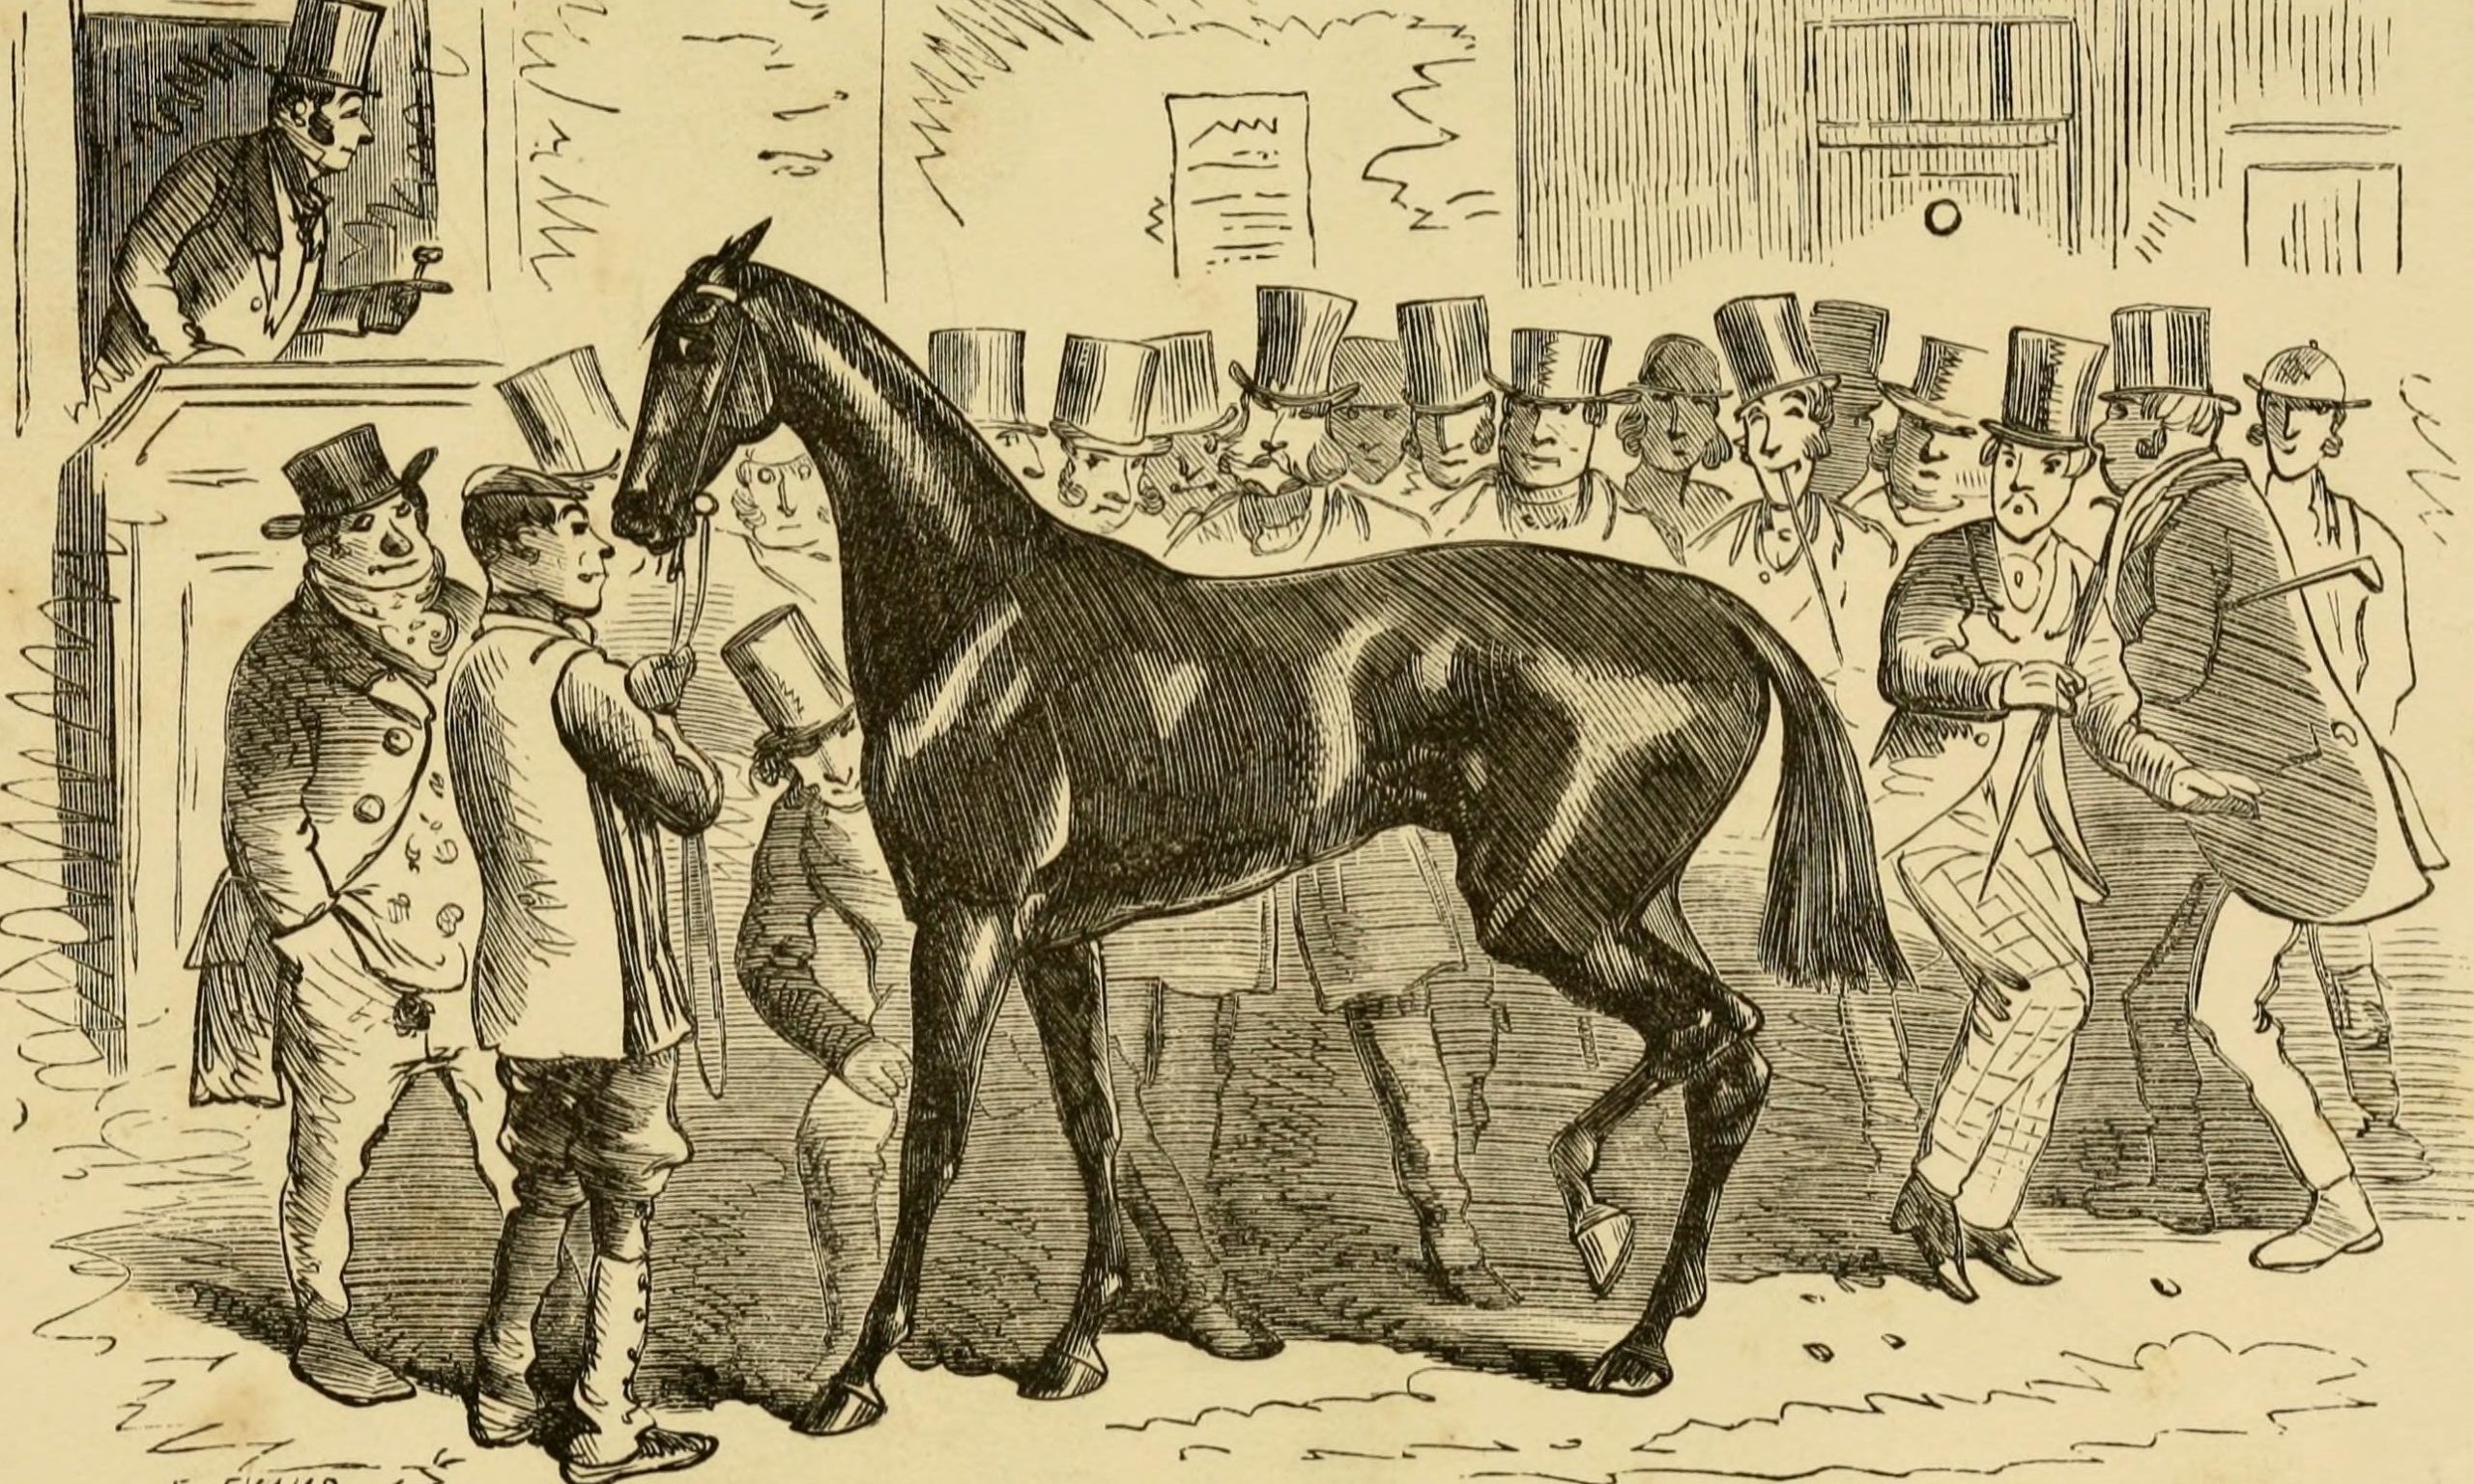 " The Life of a Racehorse" by John Mills (1861)